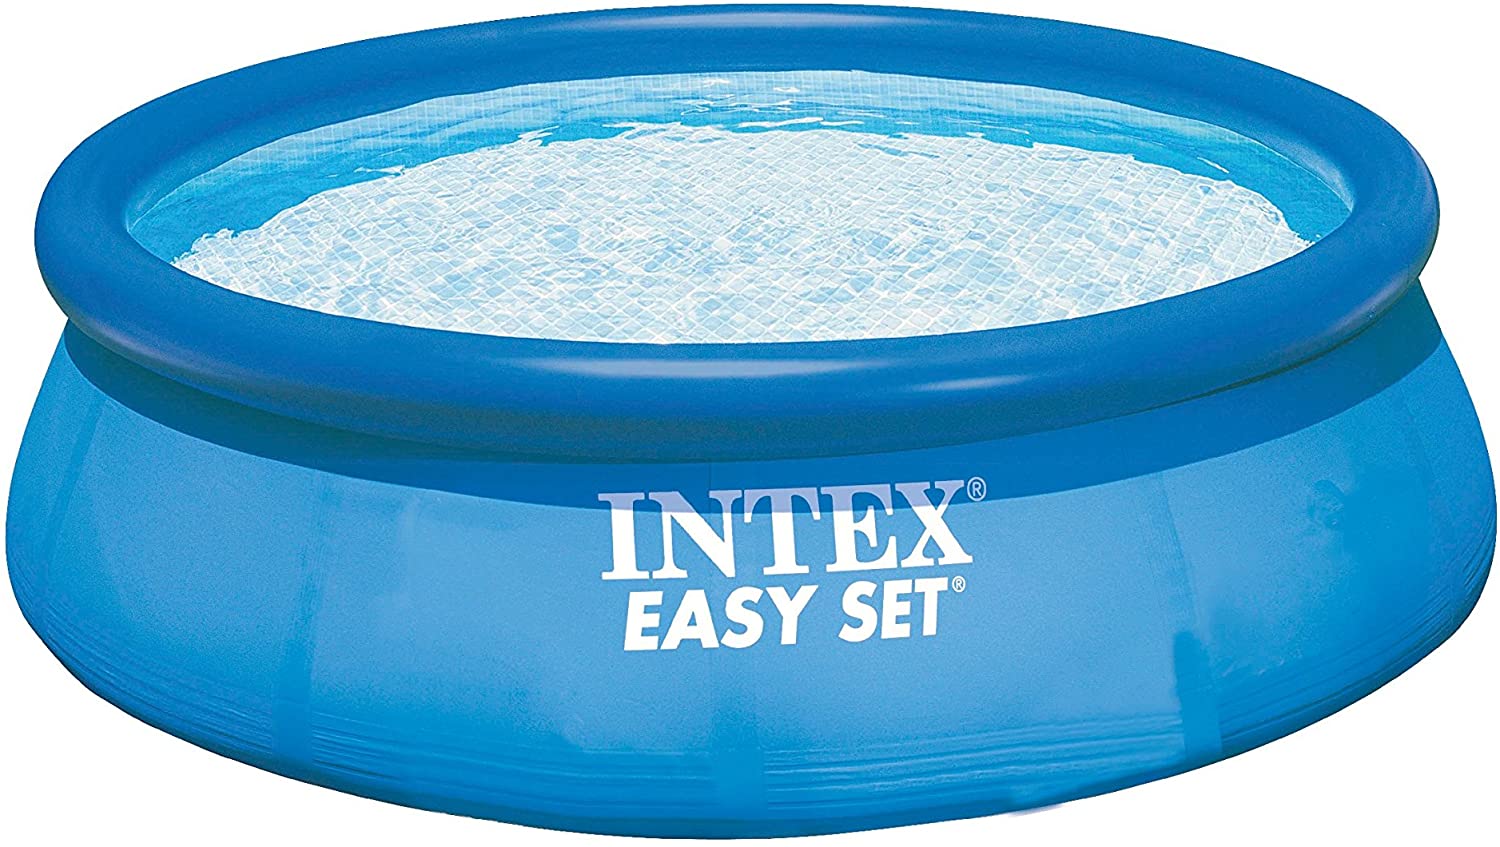 Swimming Pool- Easy Set, 8ft.x30in. - image 2 of 3